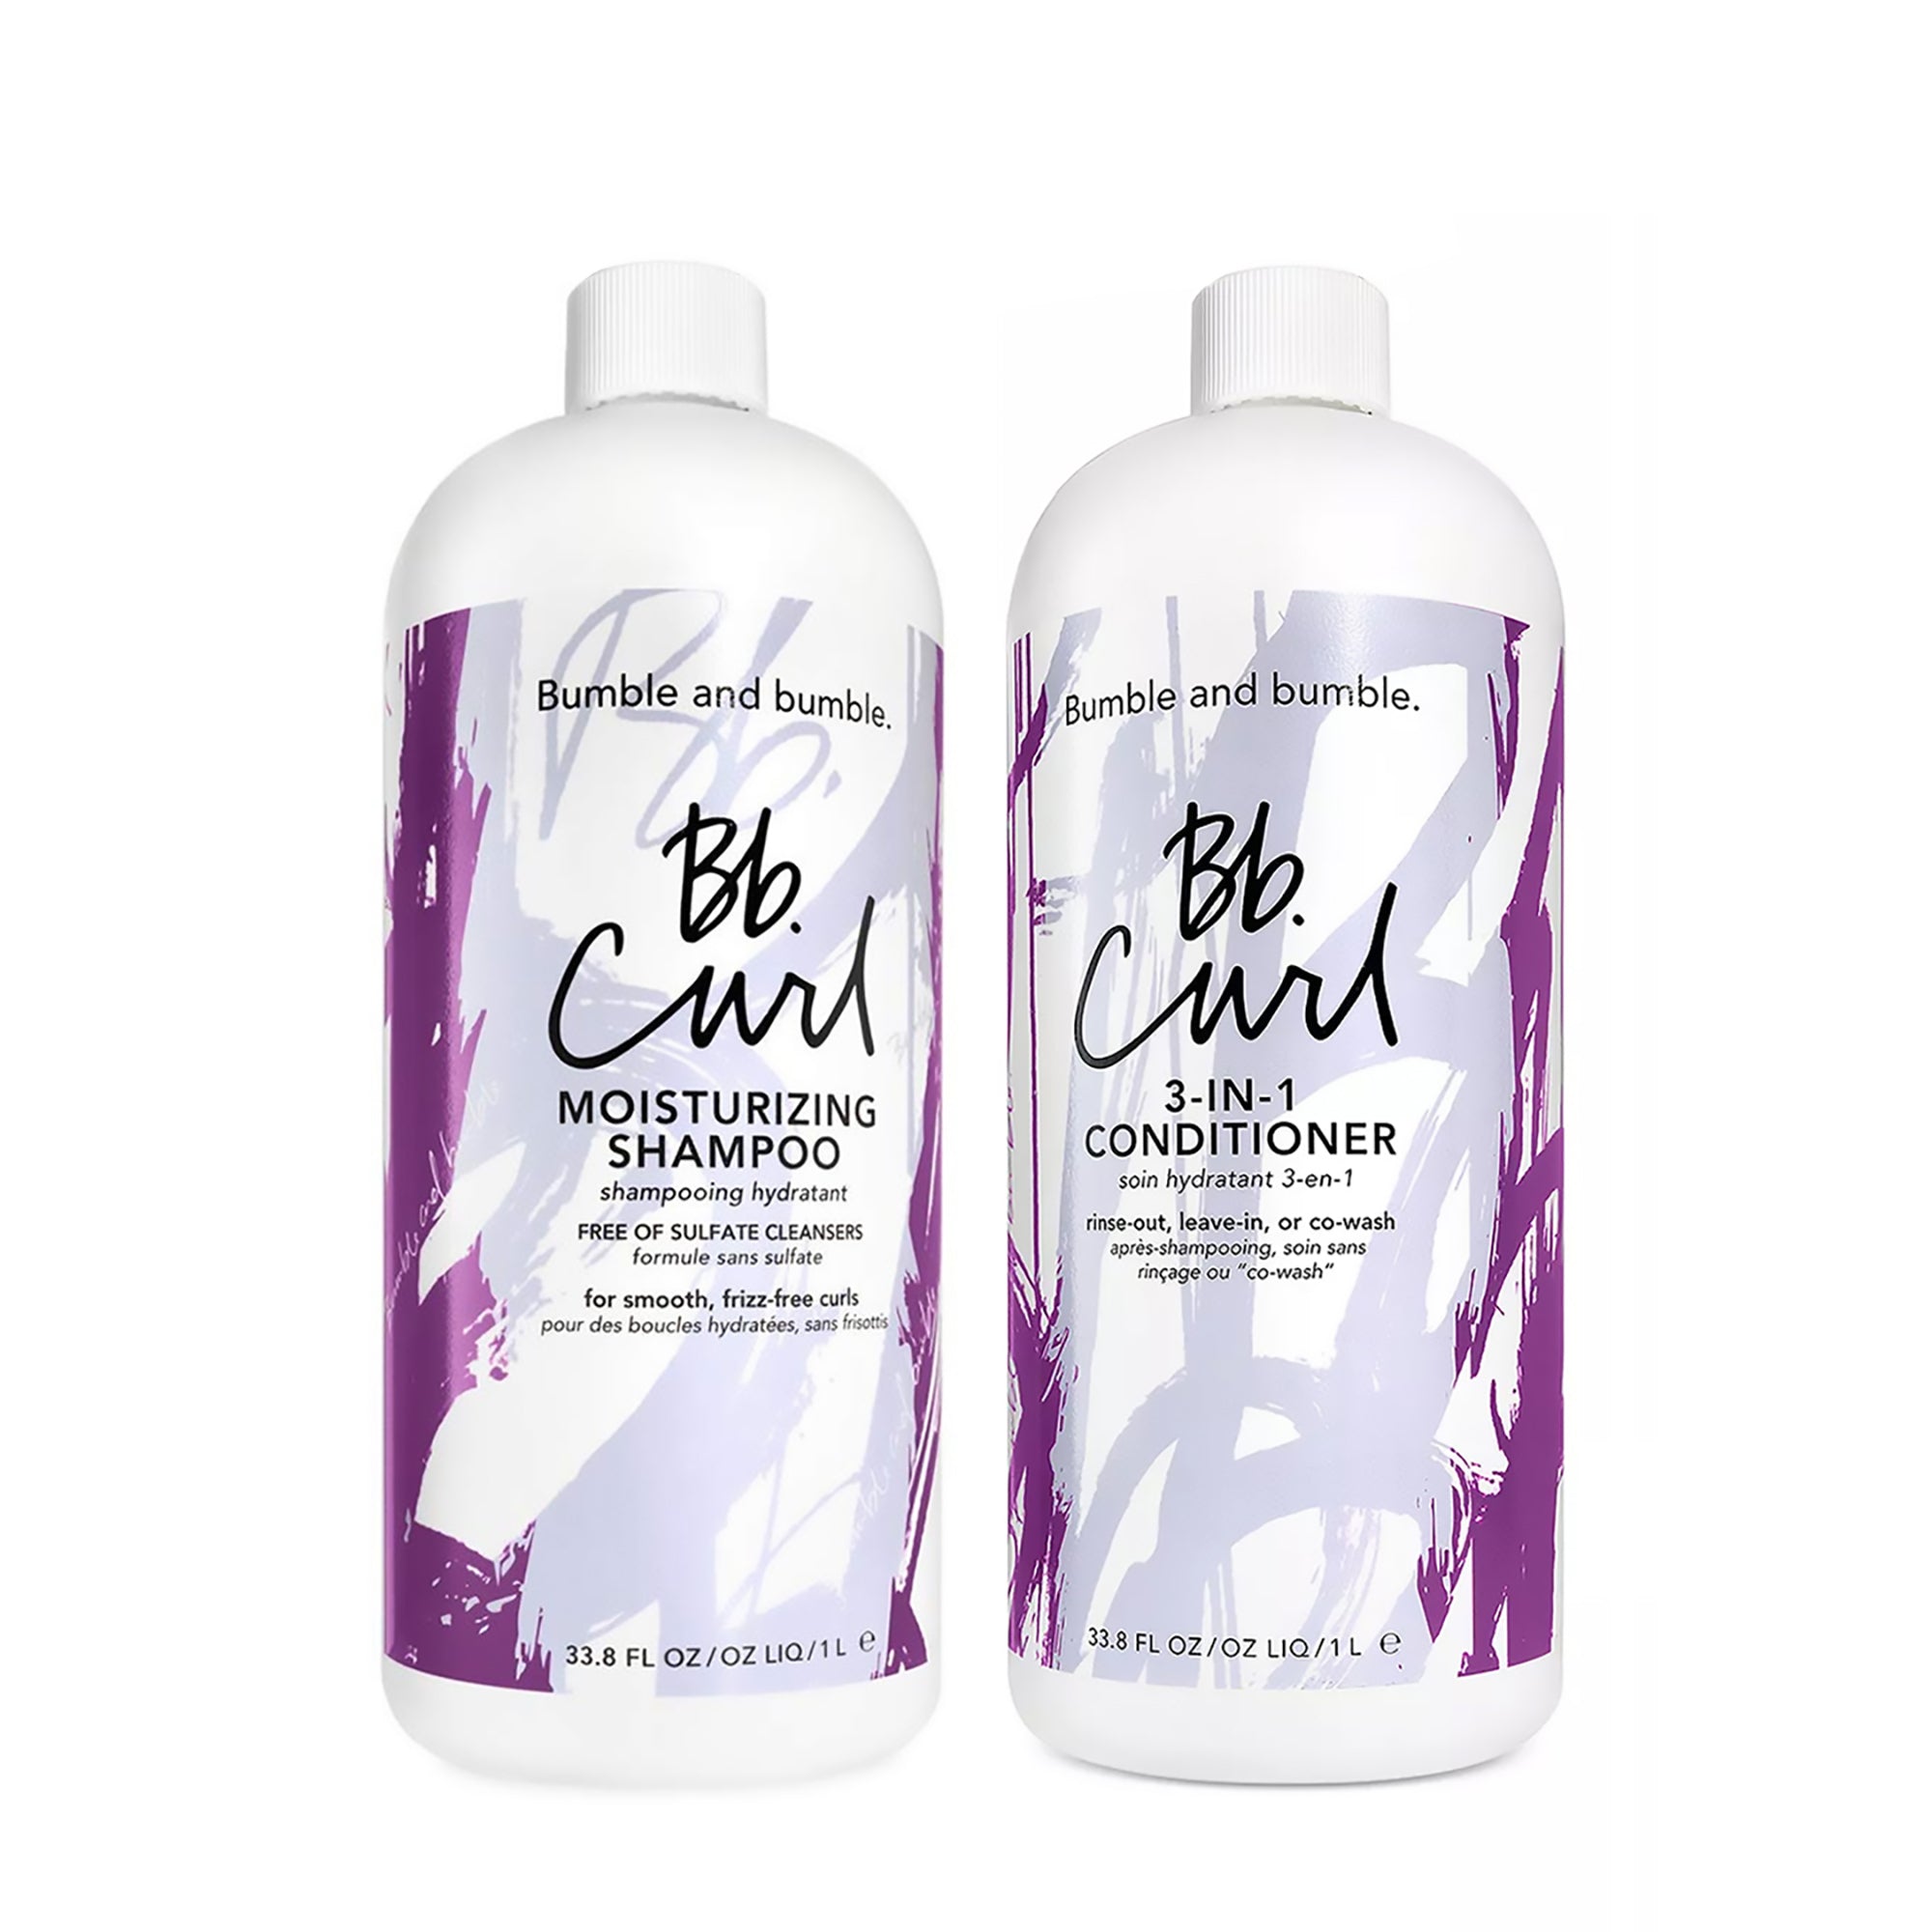 Bumble and bumble Bb.Curl Moisturizing Shampoo and Conditioner Liter Duo ($204 Value) / LITER